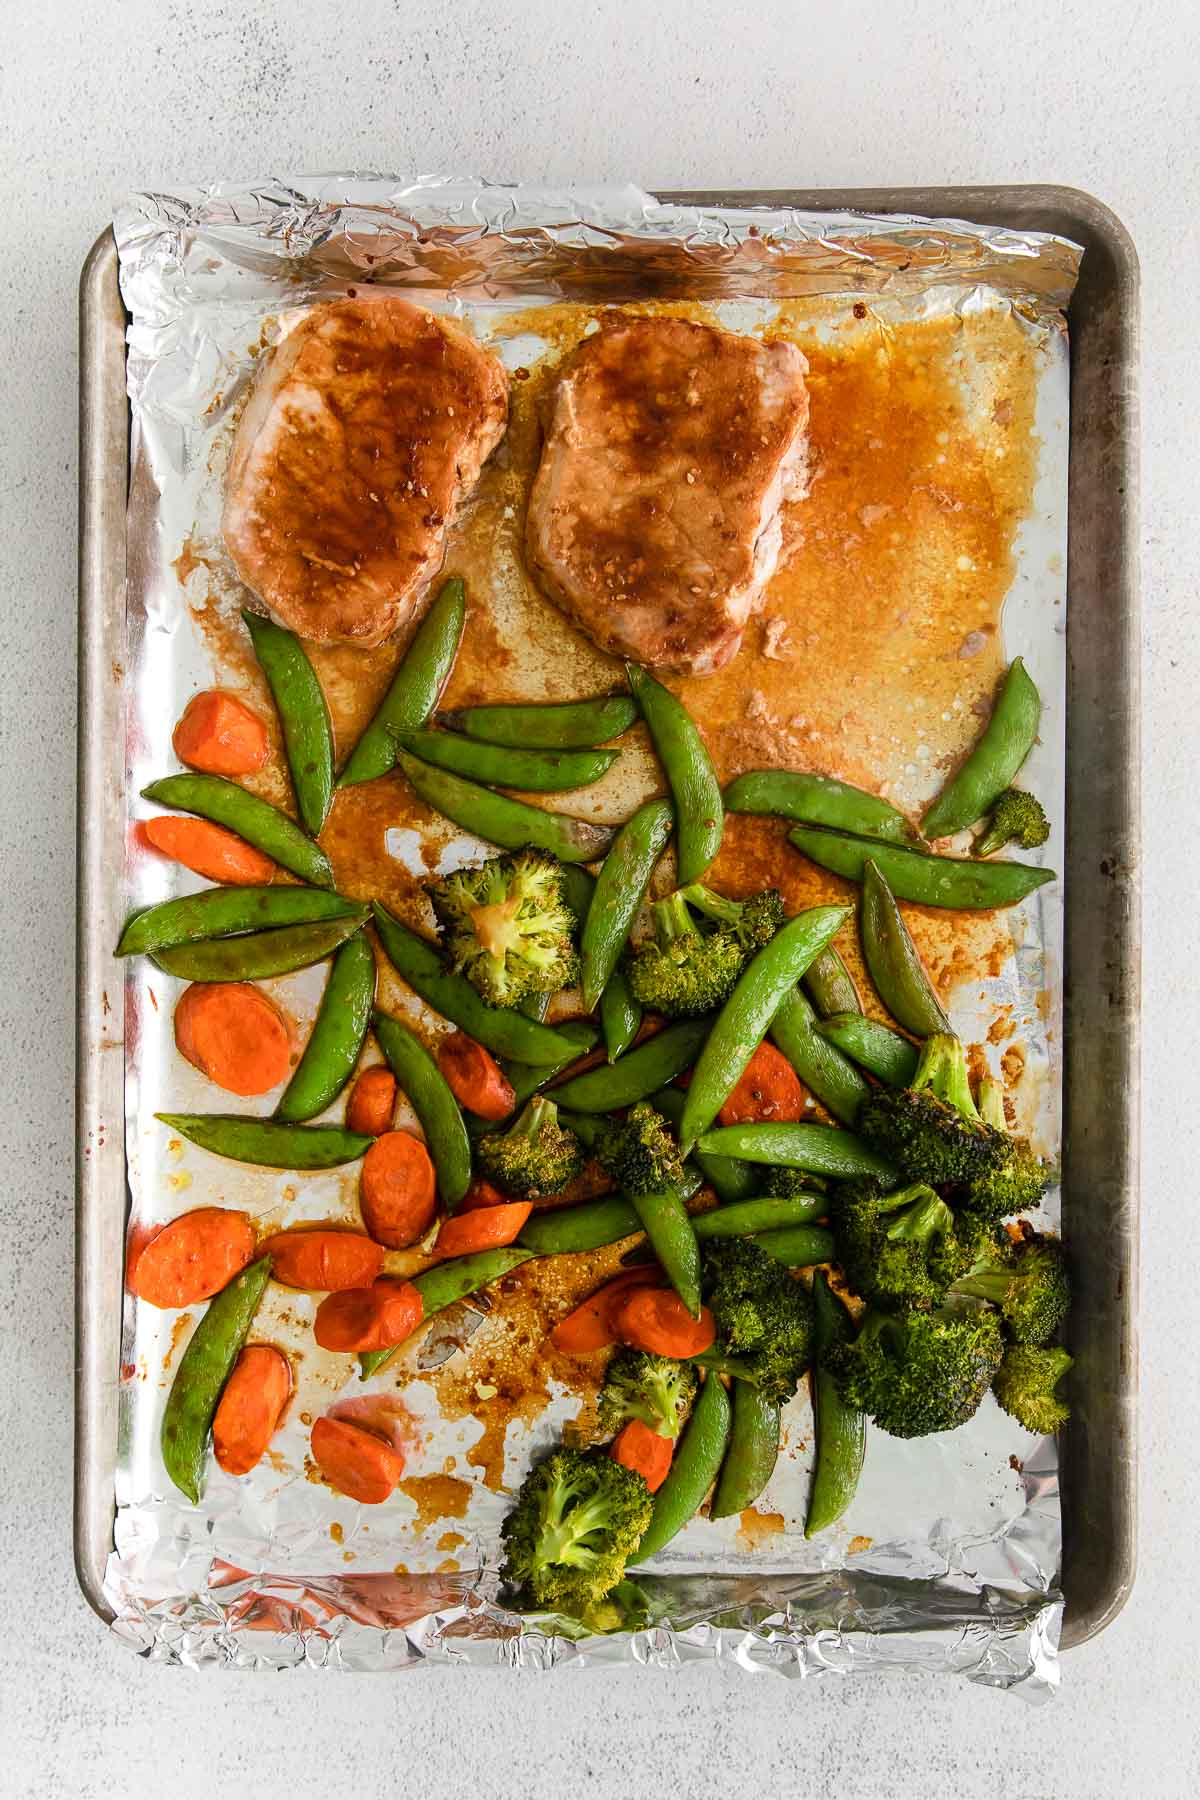 sheet pan with two pork chops,, broccoli and sugar snap peas baked with a soy sauce marinade